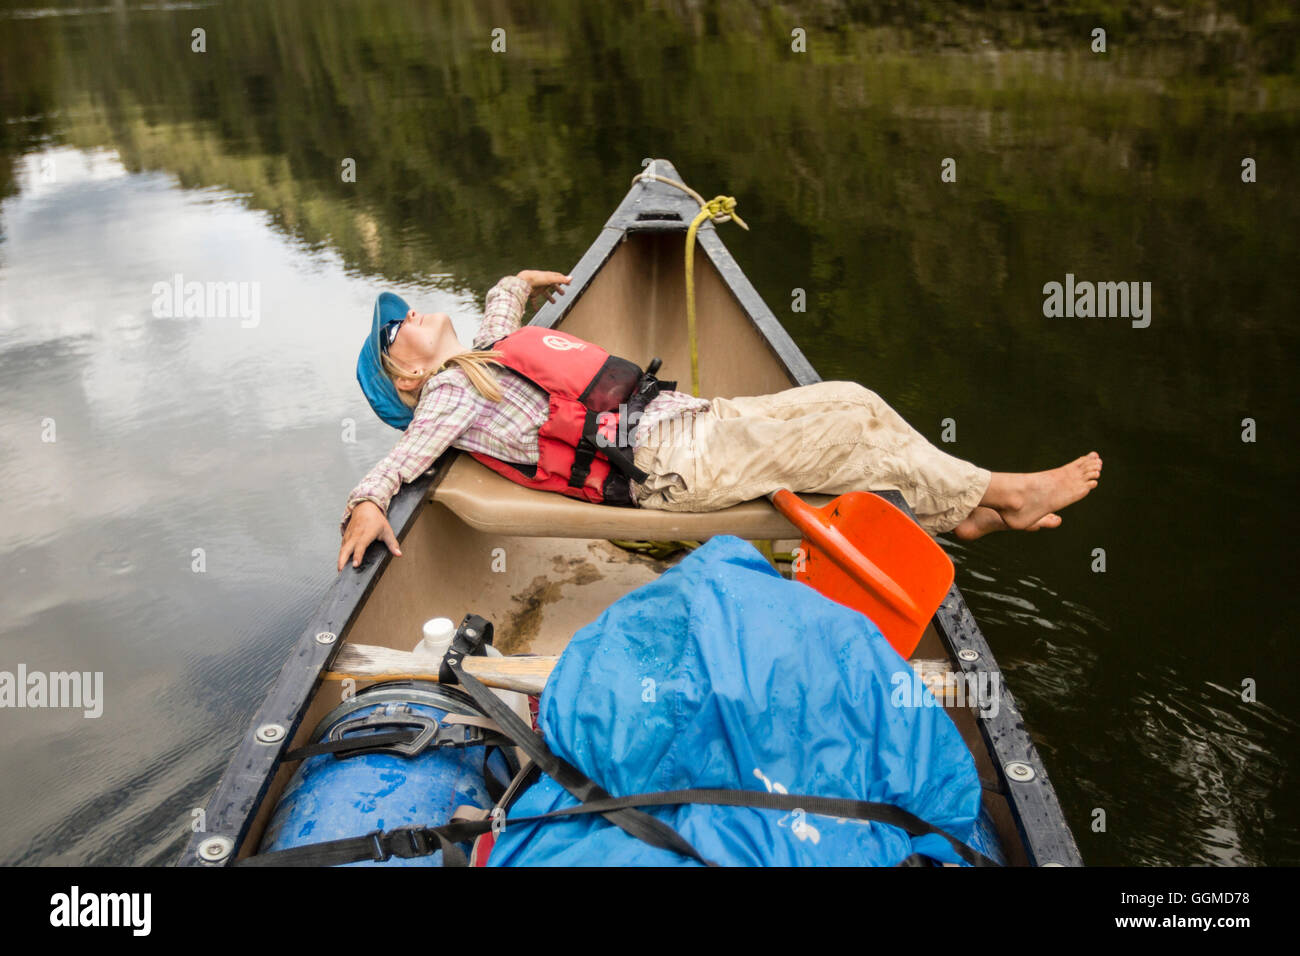 A girl on a canoe trip on the Whanganui River, North Island, New Zealand Stock Photo